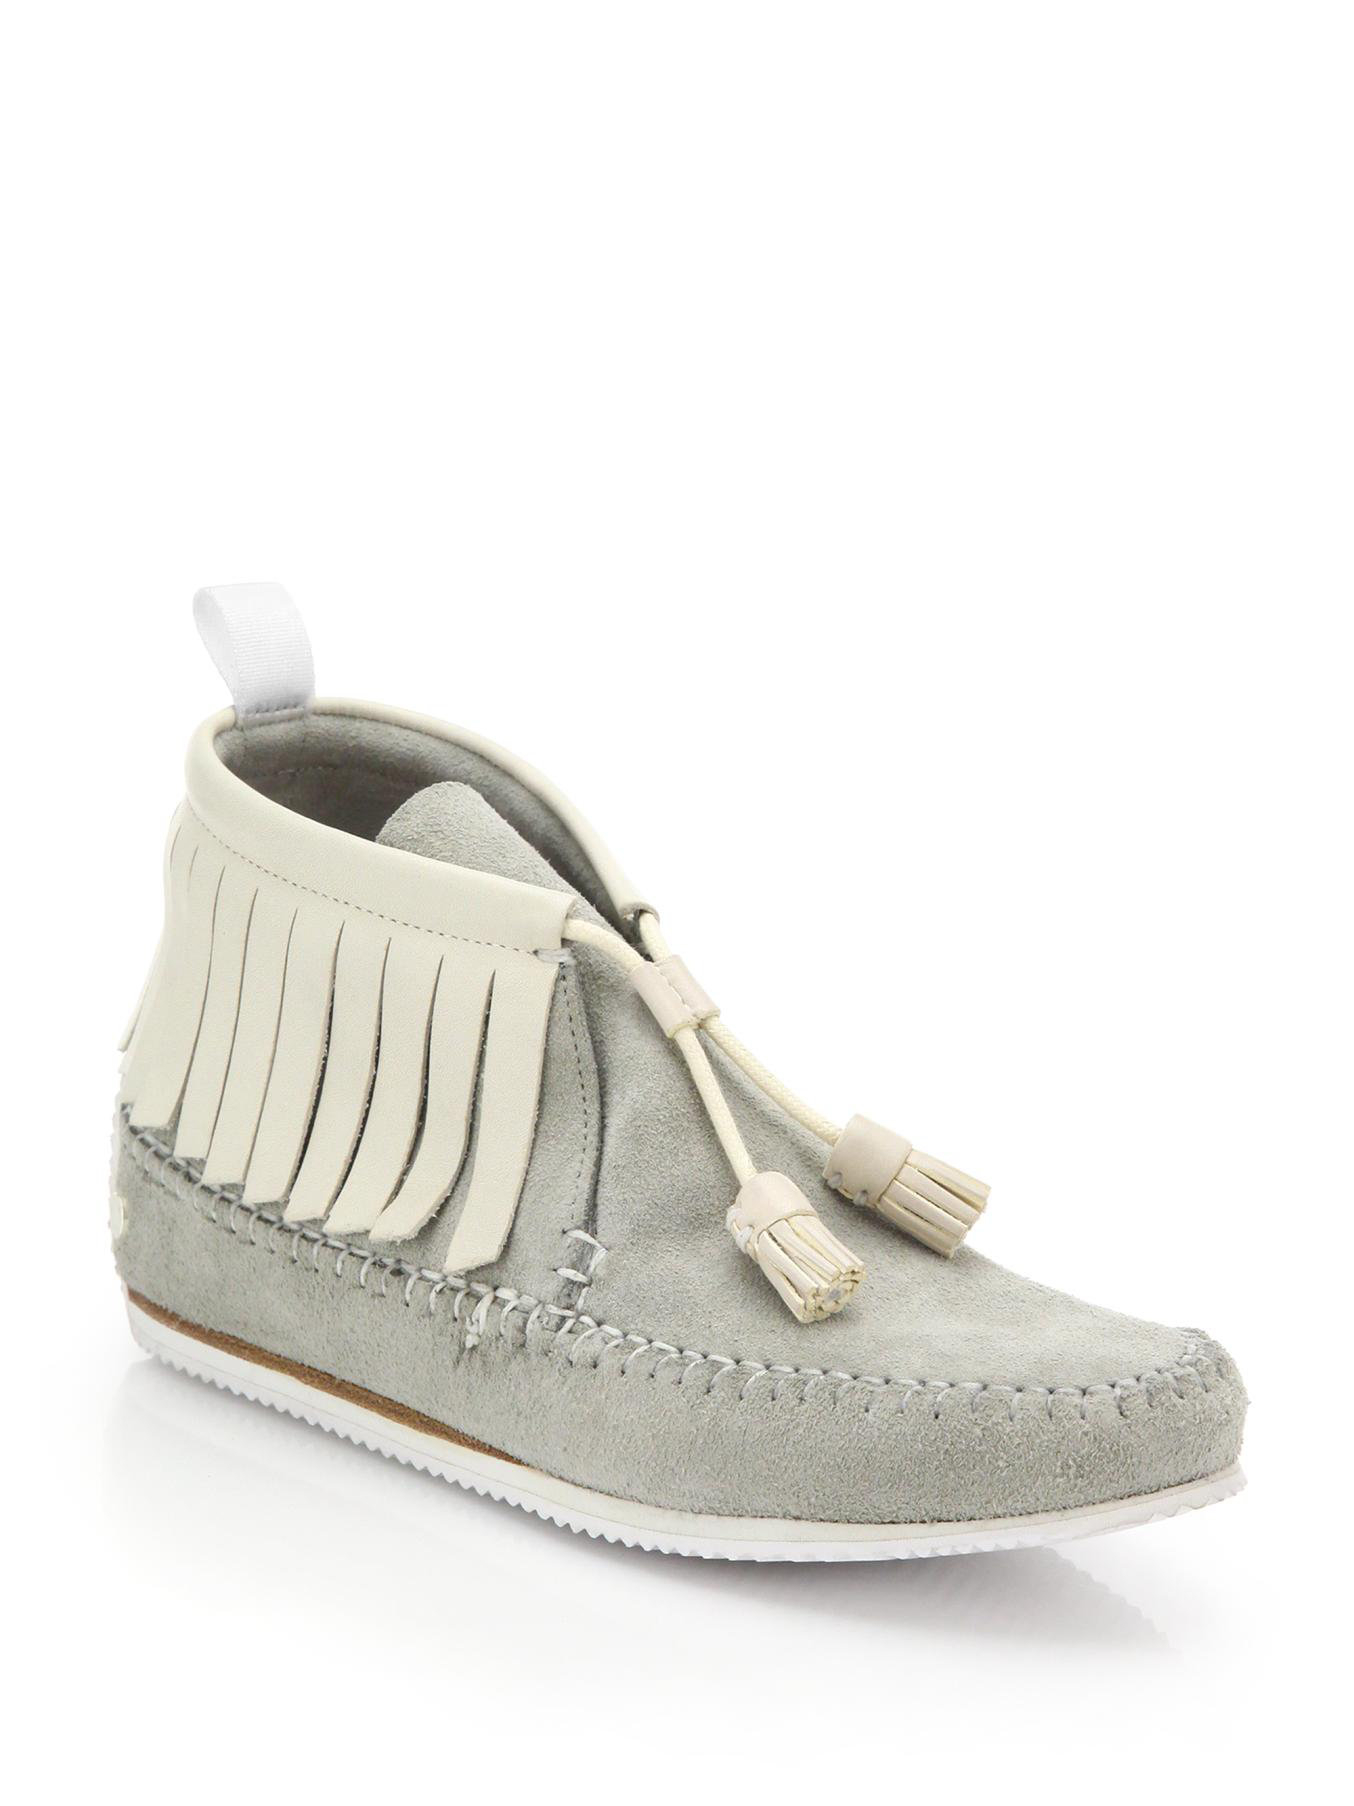 rag and bone moccasin boots